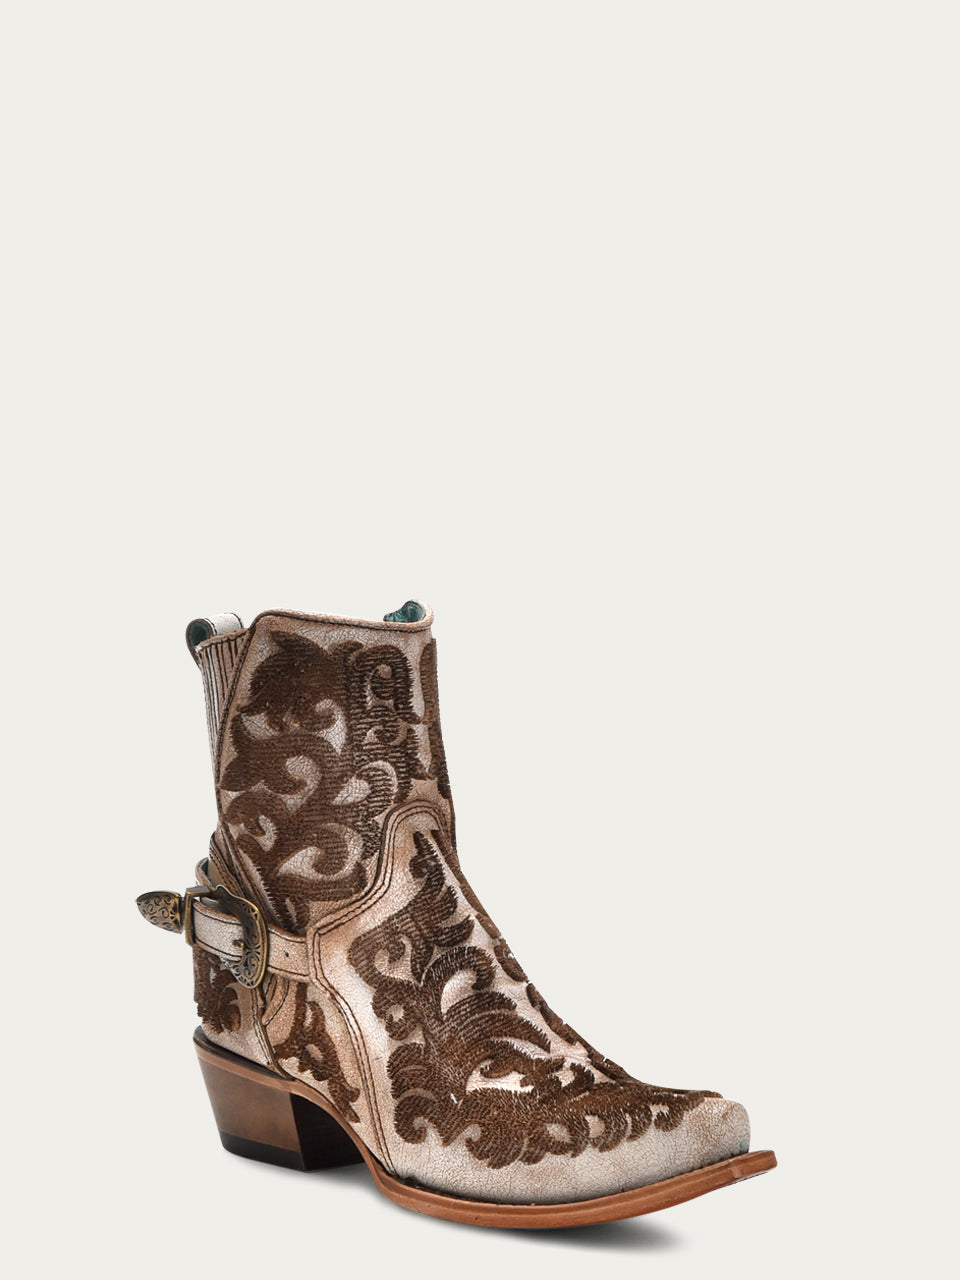 Corral Boots – Corral Boot Company LLC